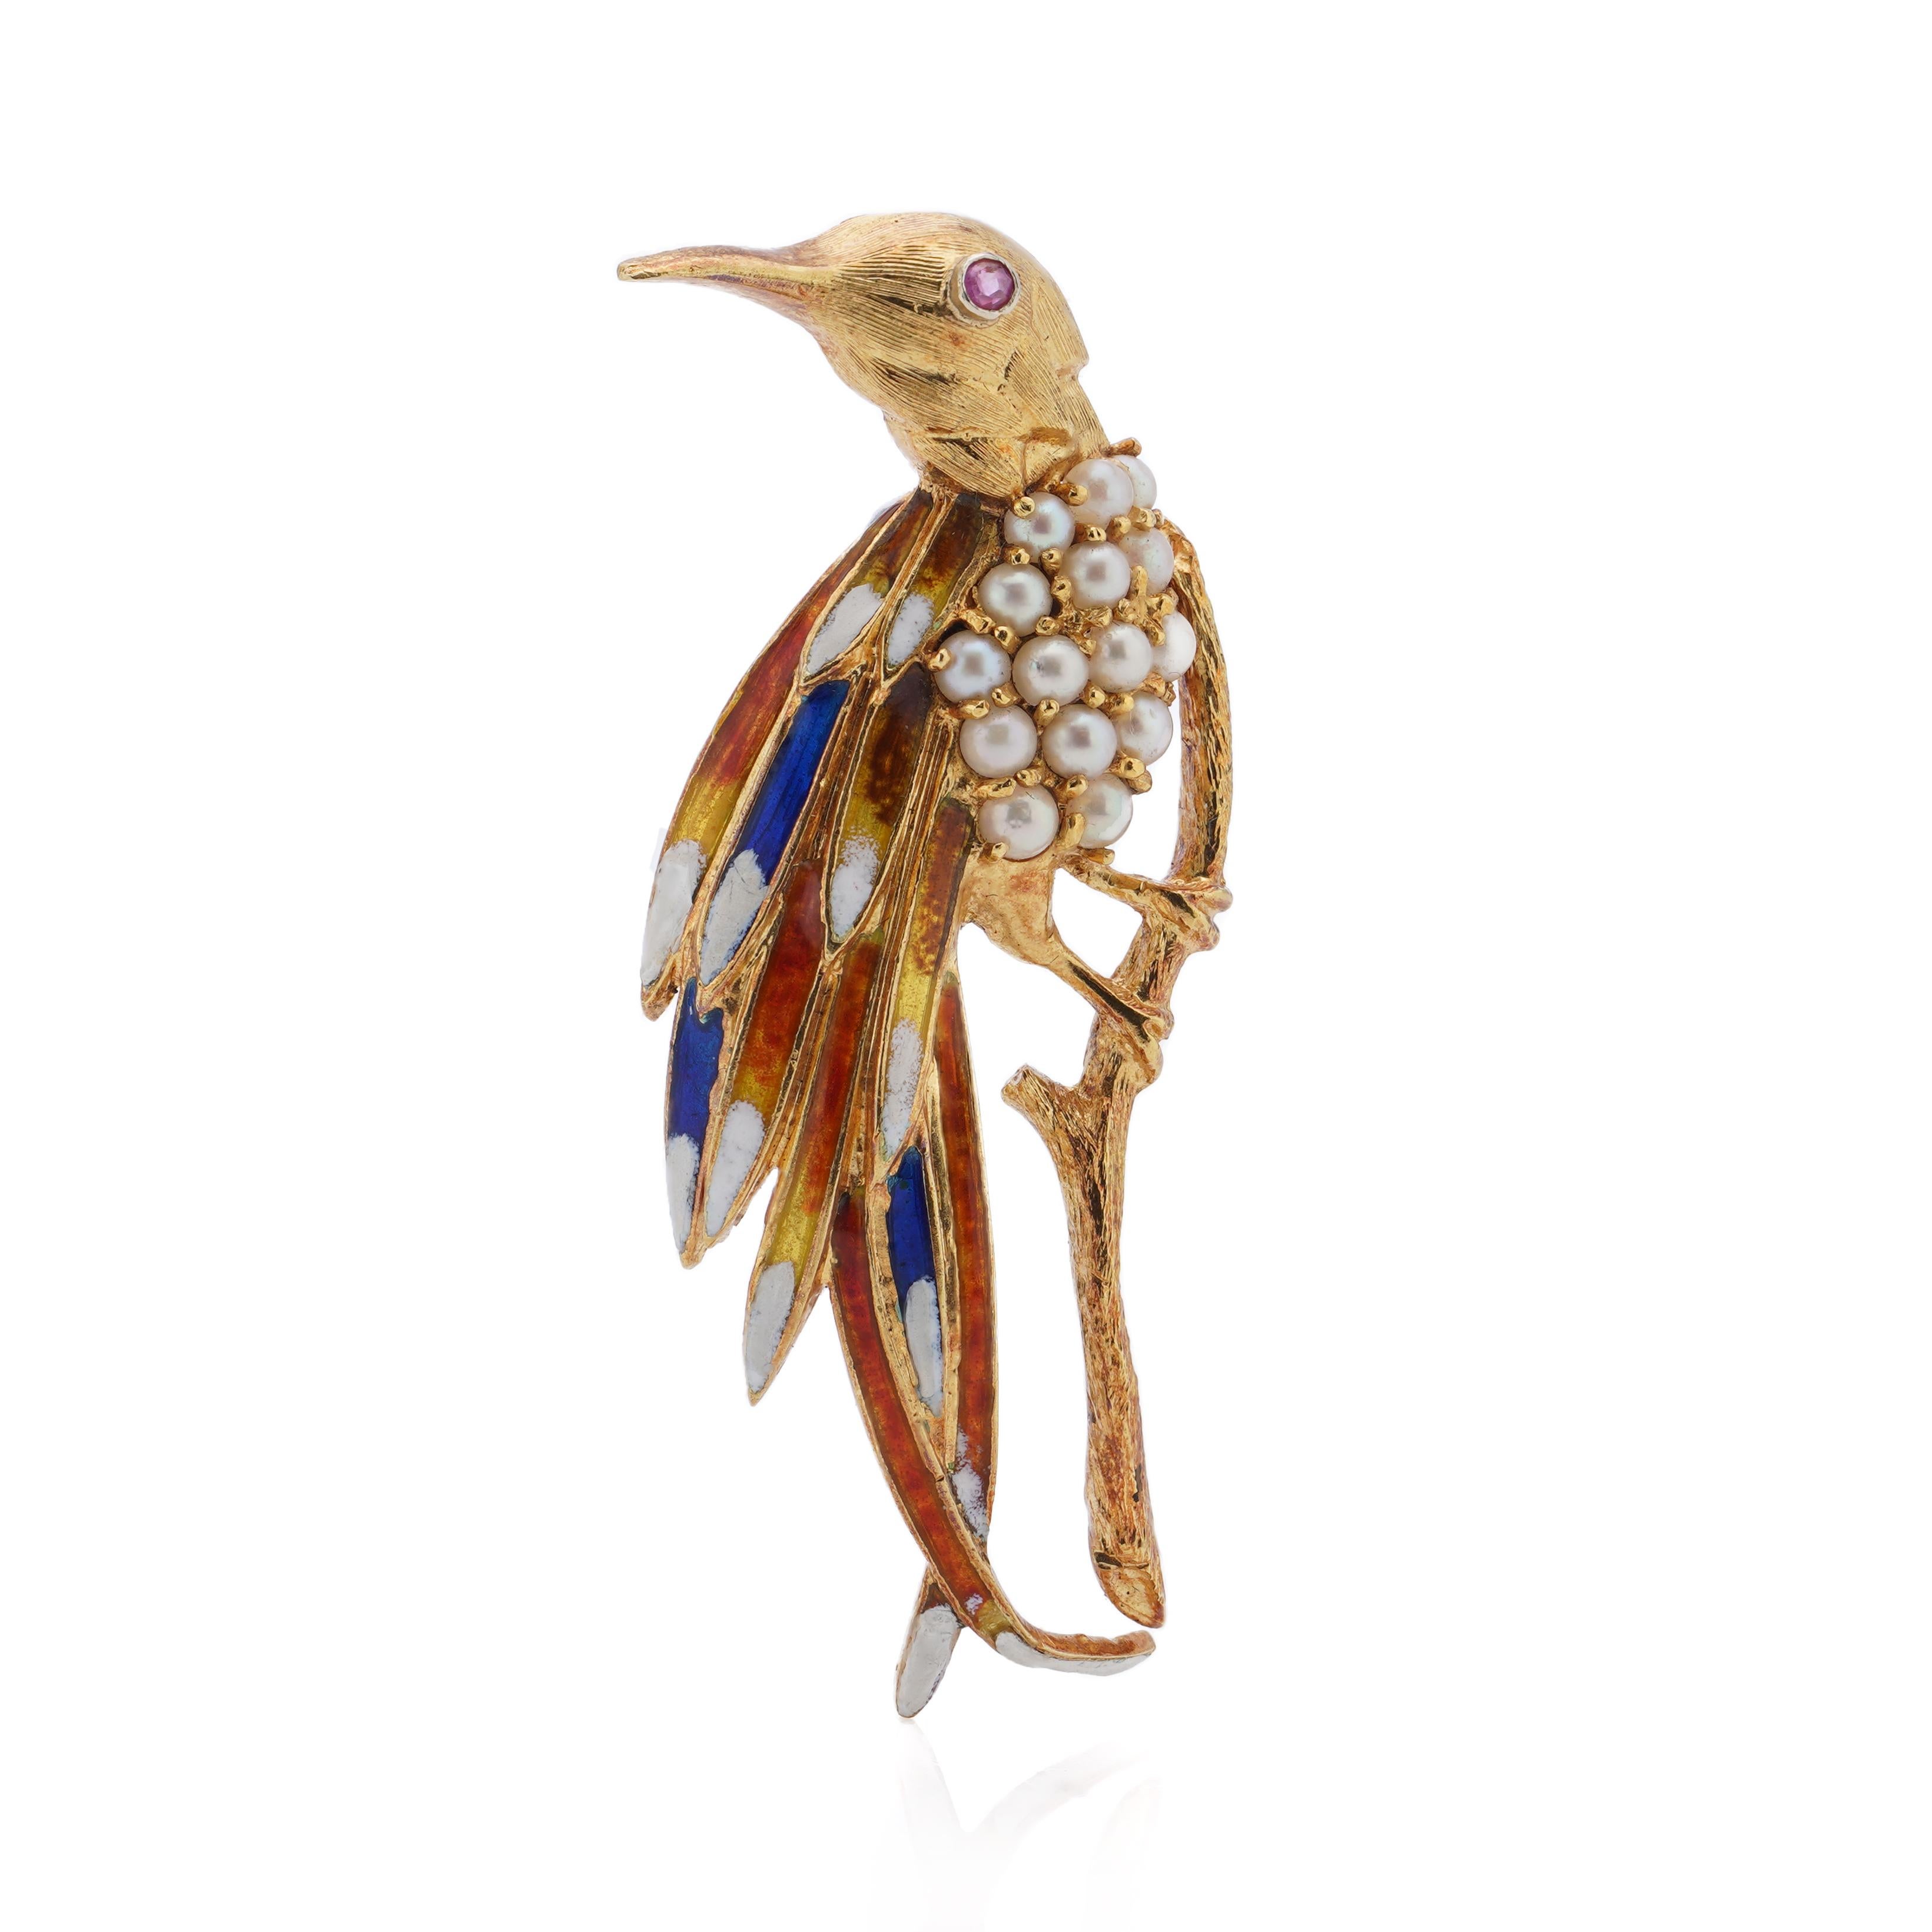 Mid-20th century 18kt gold bird brooch on a branch with colourful feathers For Sale 4